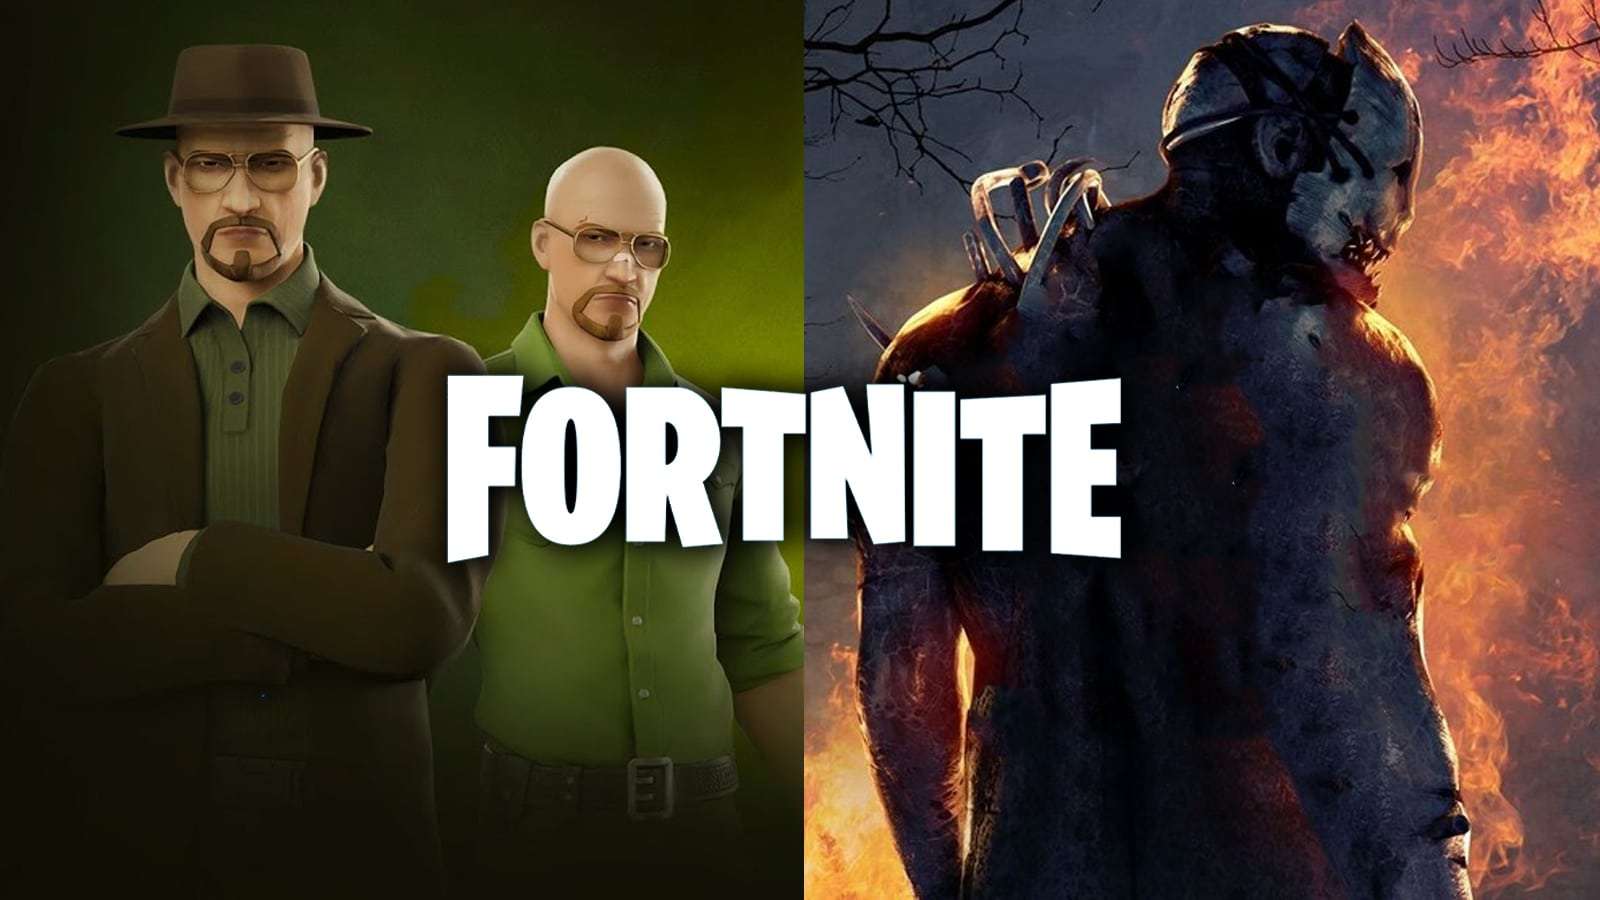 An image of Walter White from Breaking Bad in Fortnite